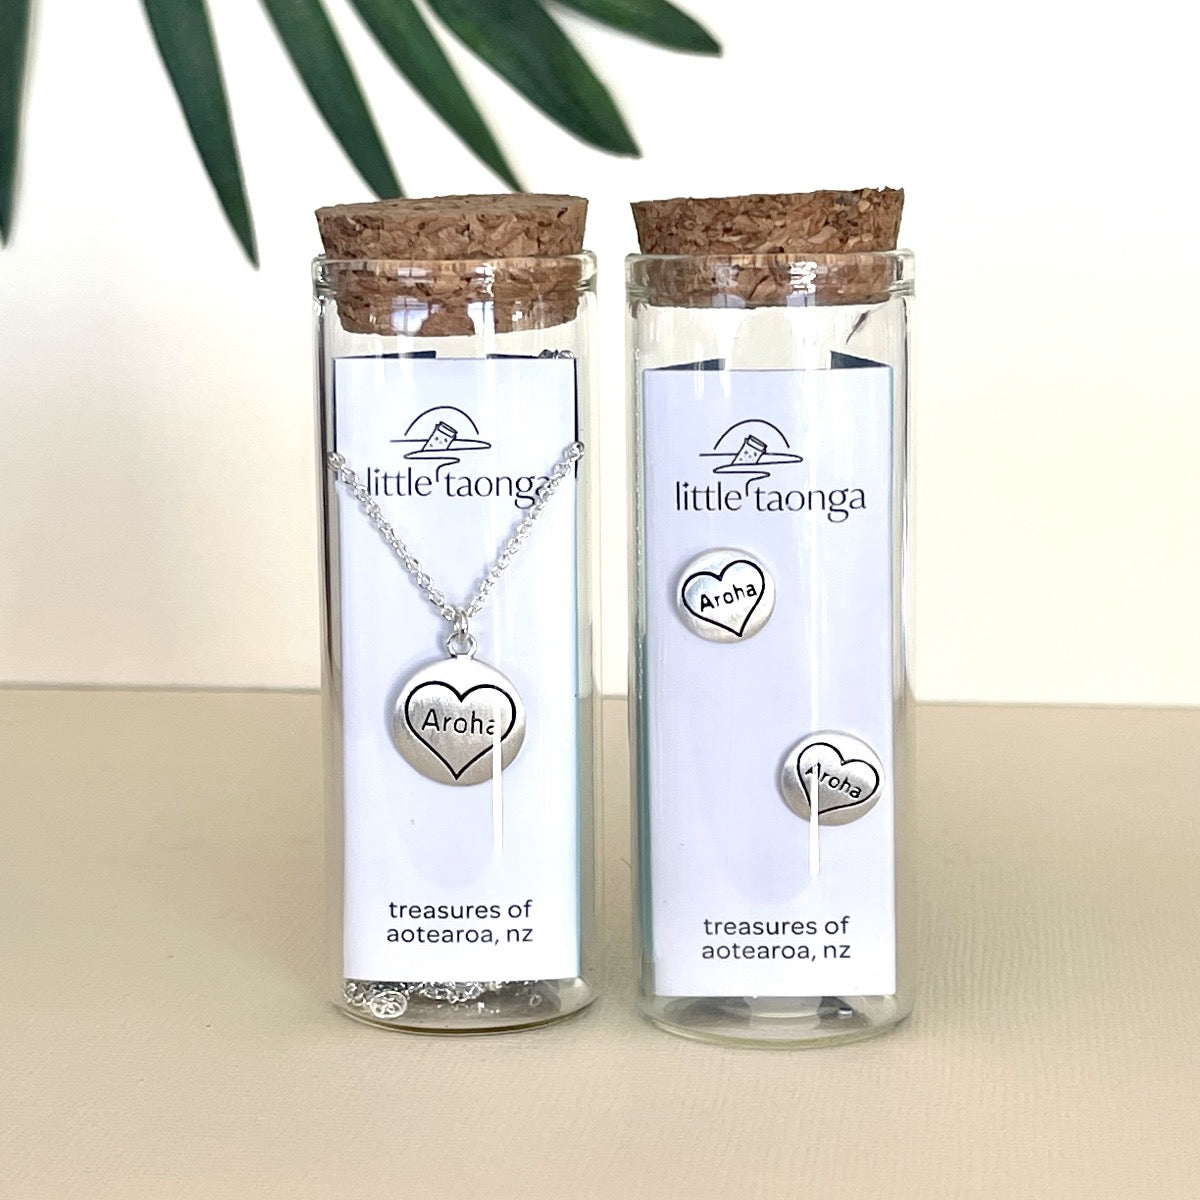 Aroha necklace and earrings set in glass bottle